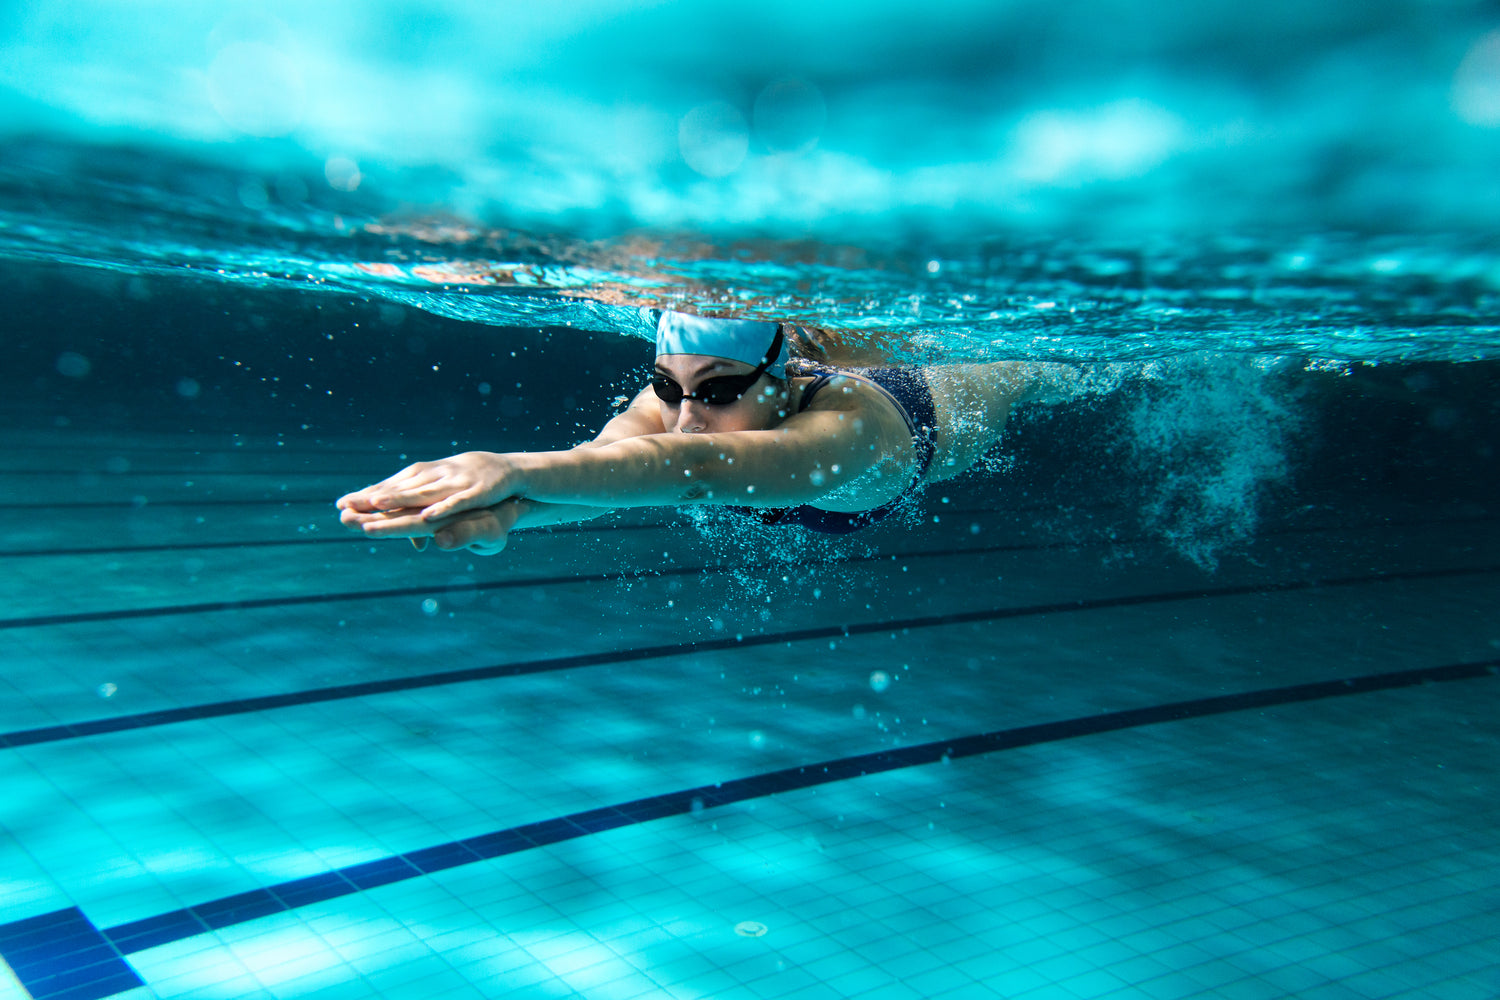 A lady swimmer with her dark swimming glasses under the water